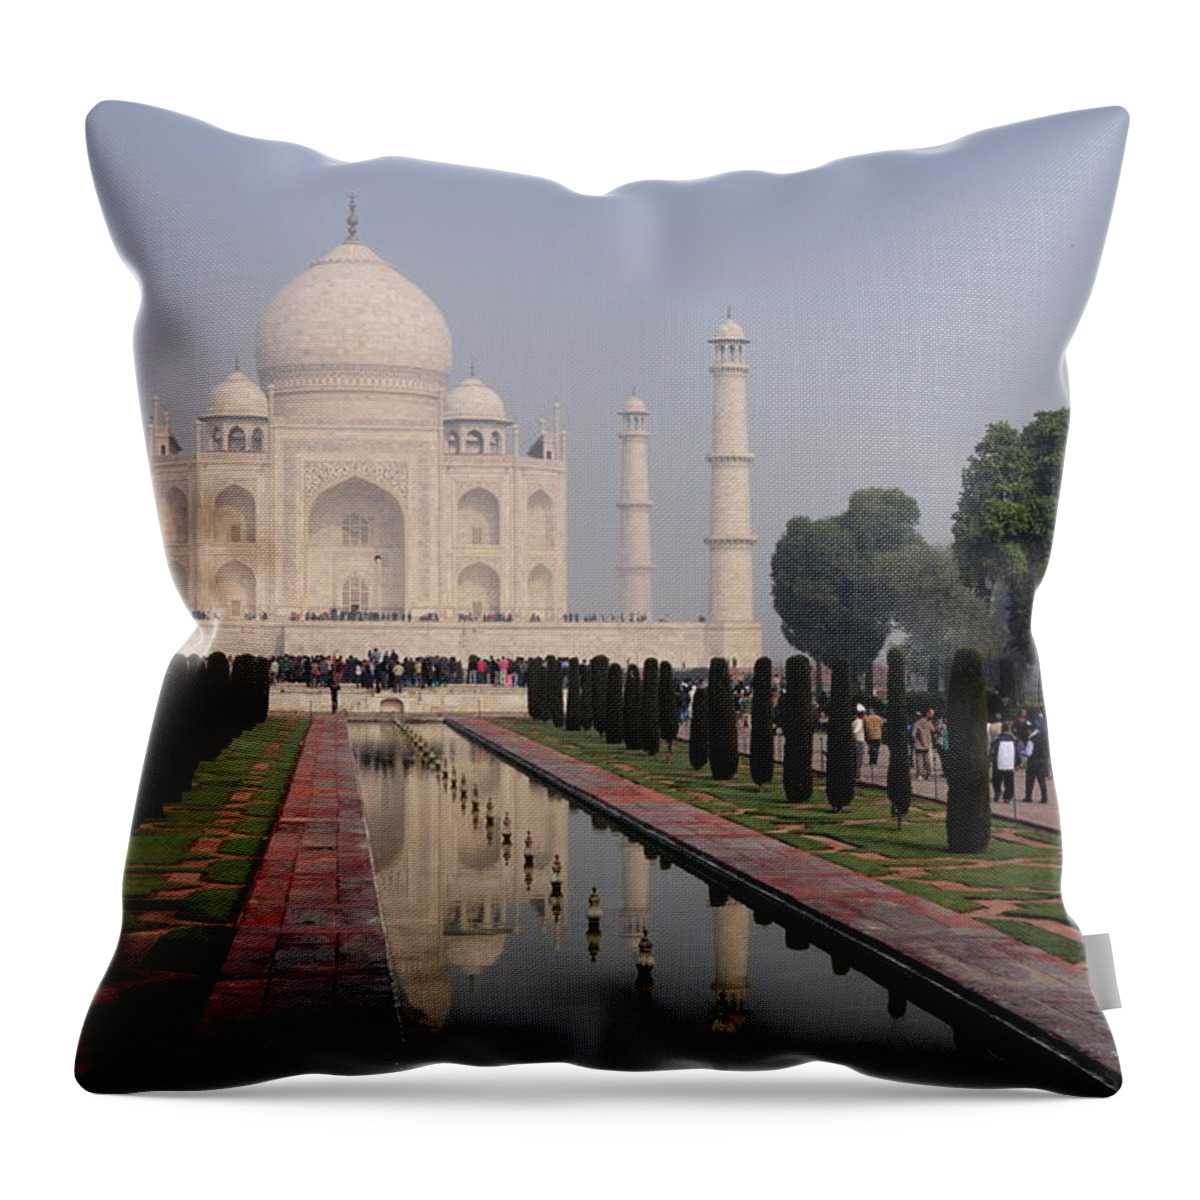 Arch Throw Pillow featuring the photograph Another View Of The Taj Mahal by Saumil Shah - Flickr.com/saumil